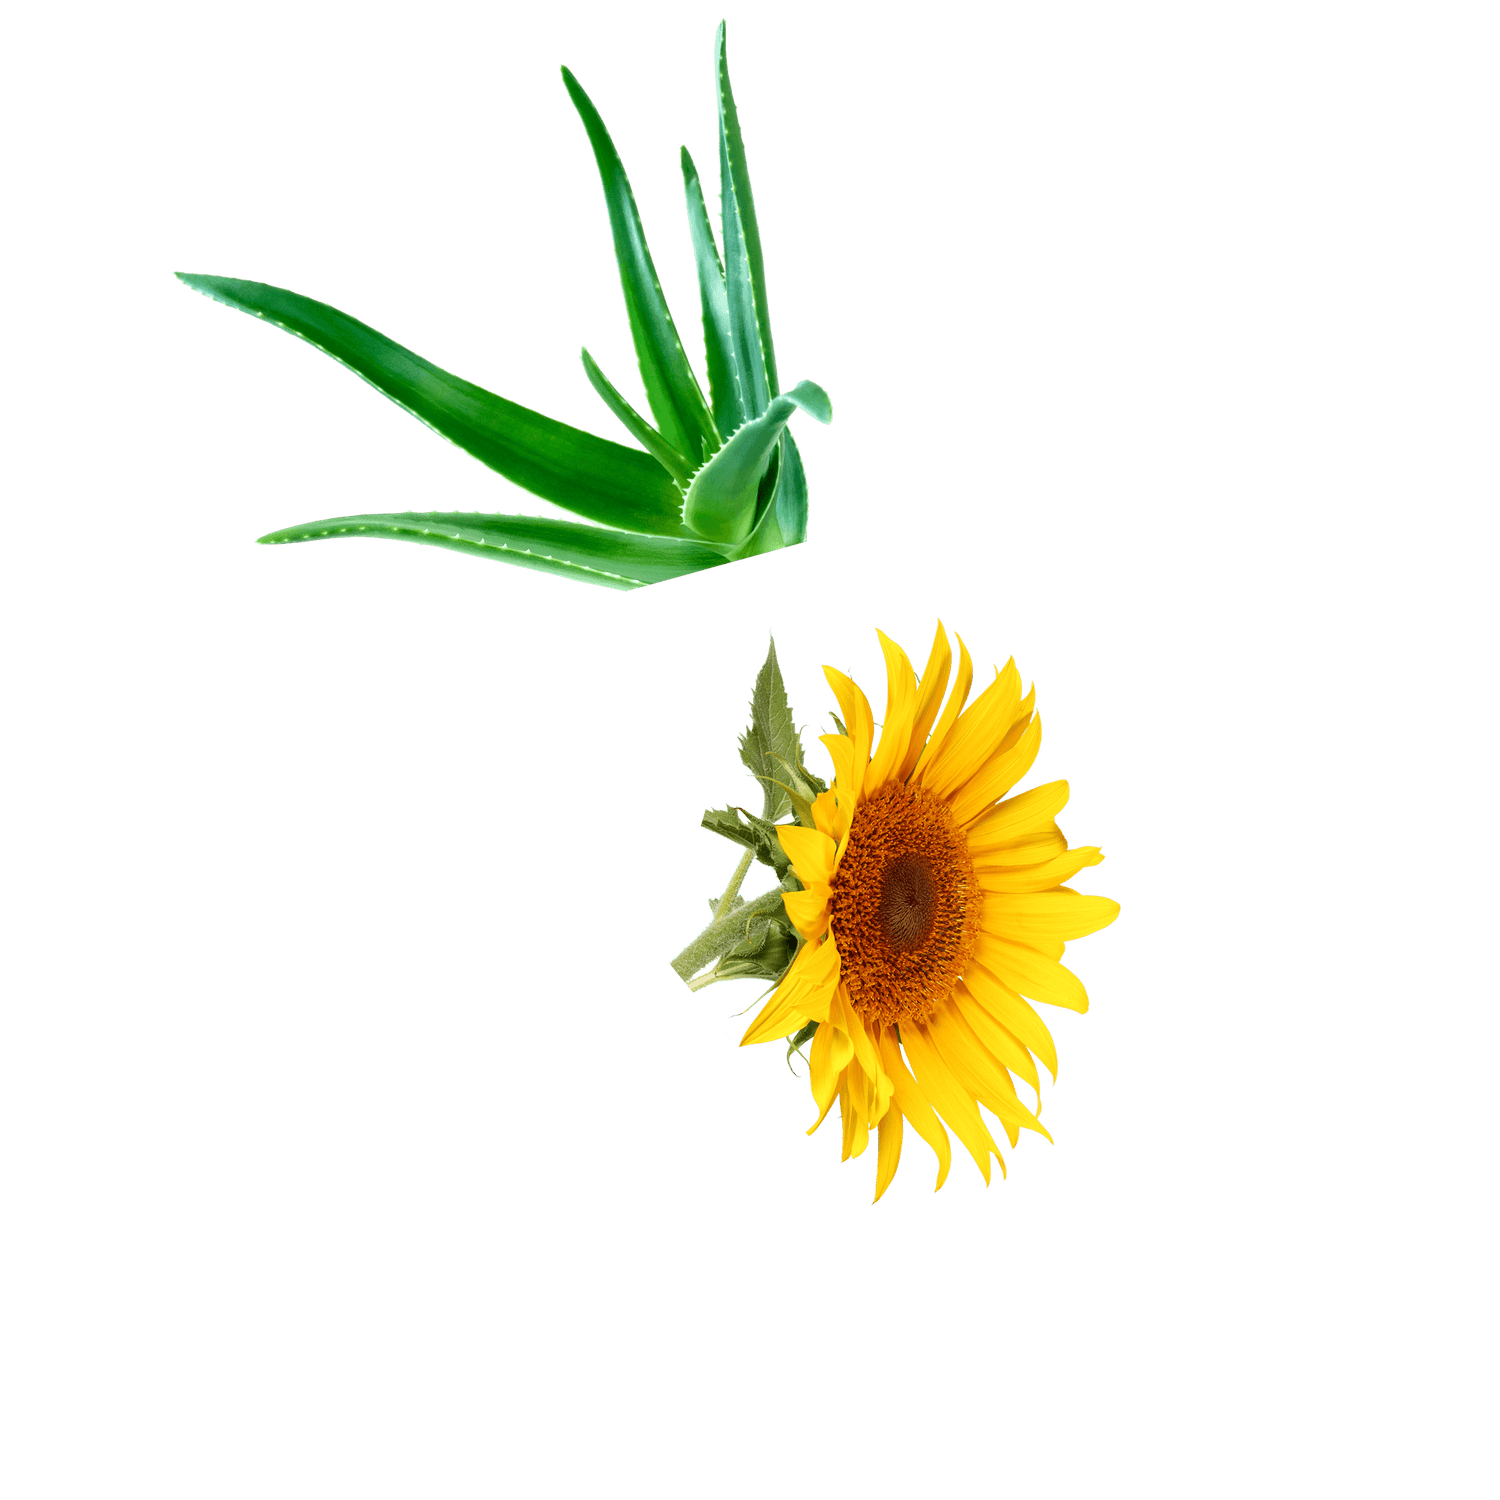 Aloe and a sunflower on a white background